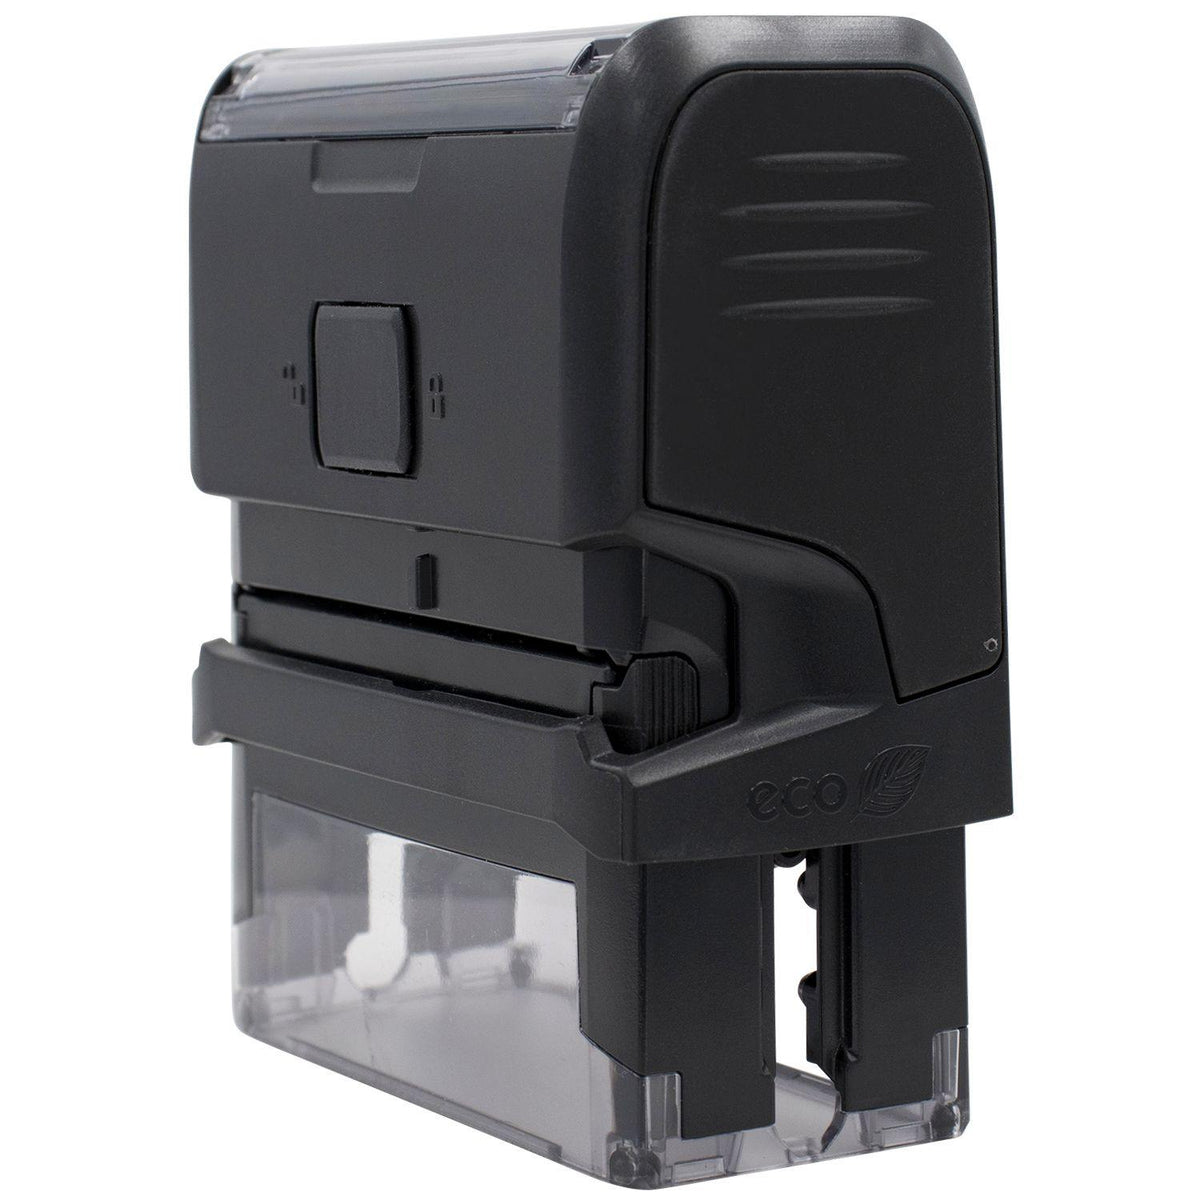 Self Inking Terrific Stamp - Engineer Seal Stamps - Brand_Trodat, Impression Size_Small, Stamp Type_Self-Inking Stamp, Type of Use_Teacher